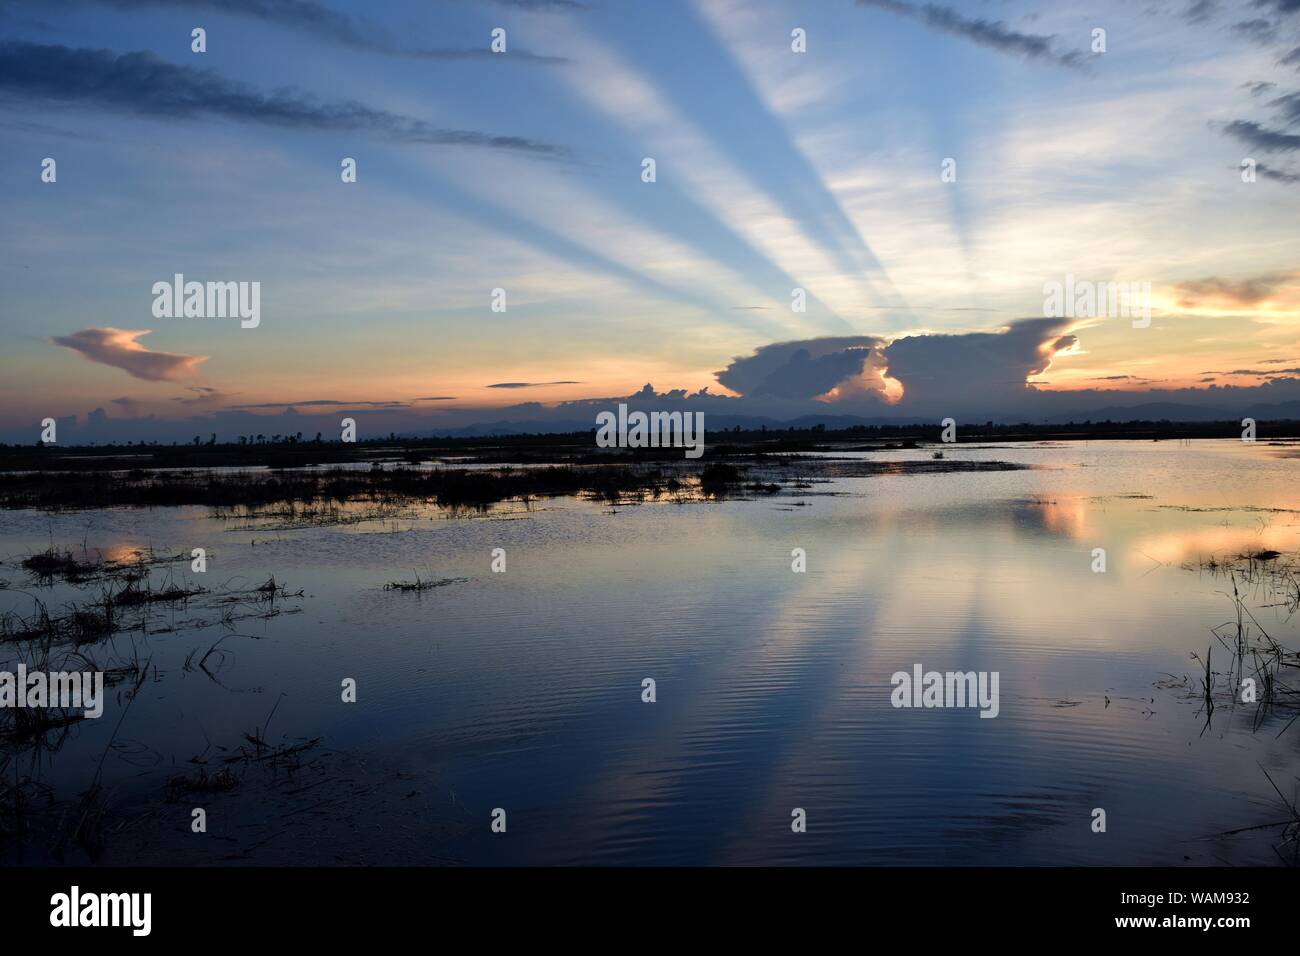 Dark blue sky over the marsh at sunset, Horizon is orange with light beam shooting out from behind dark clouds Stock Photo